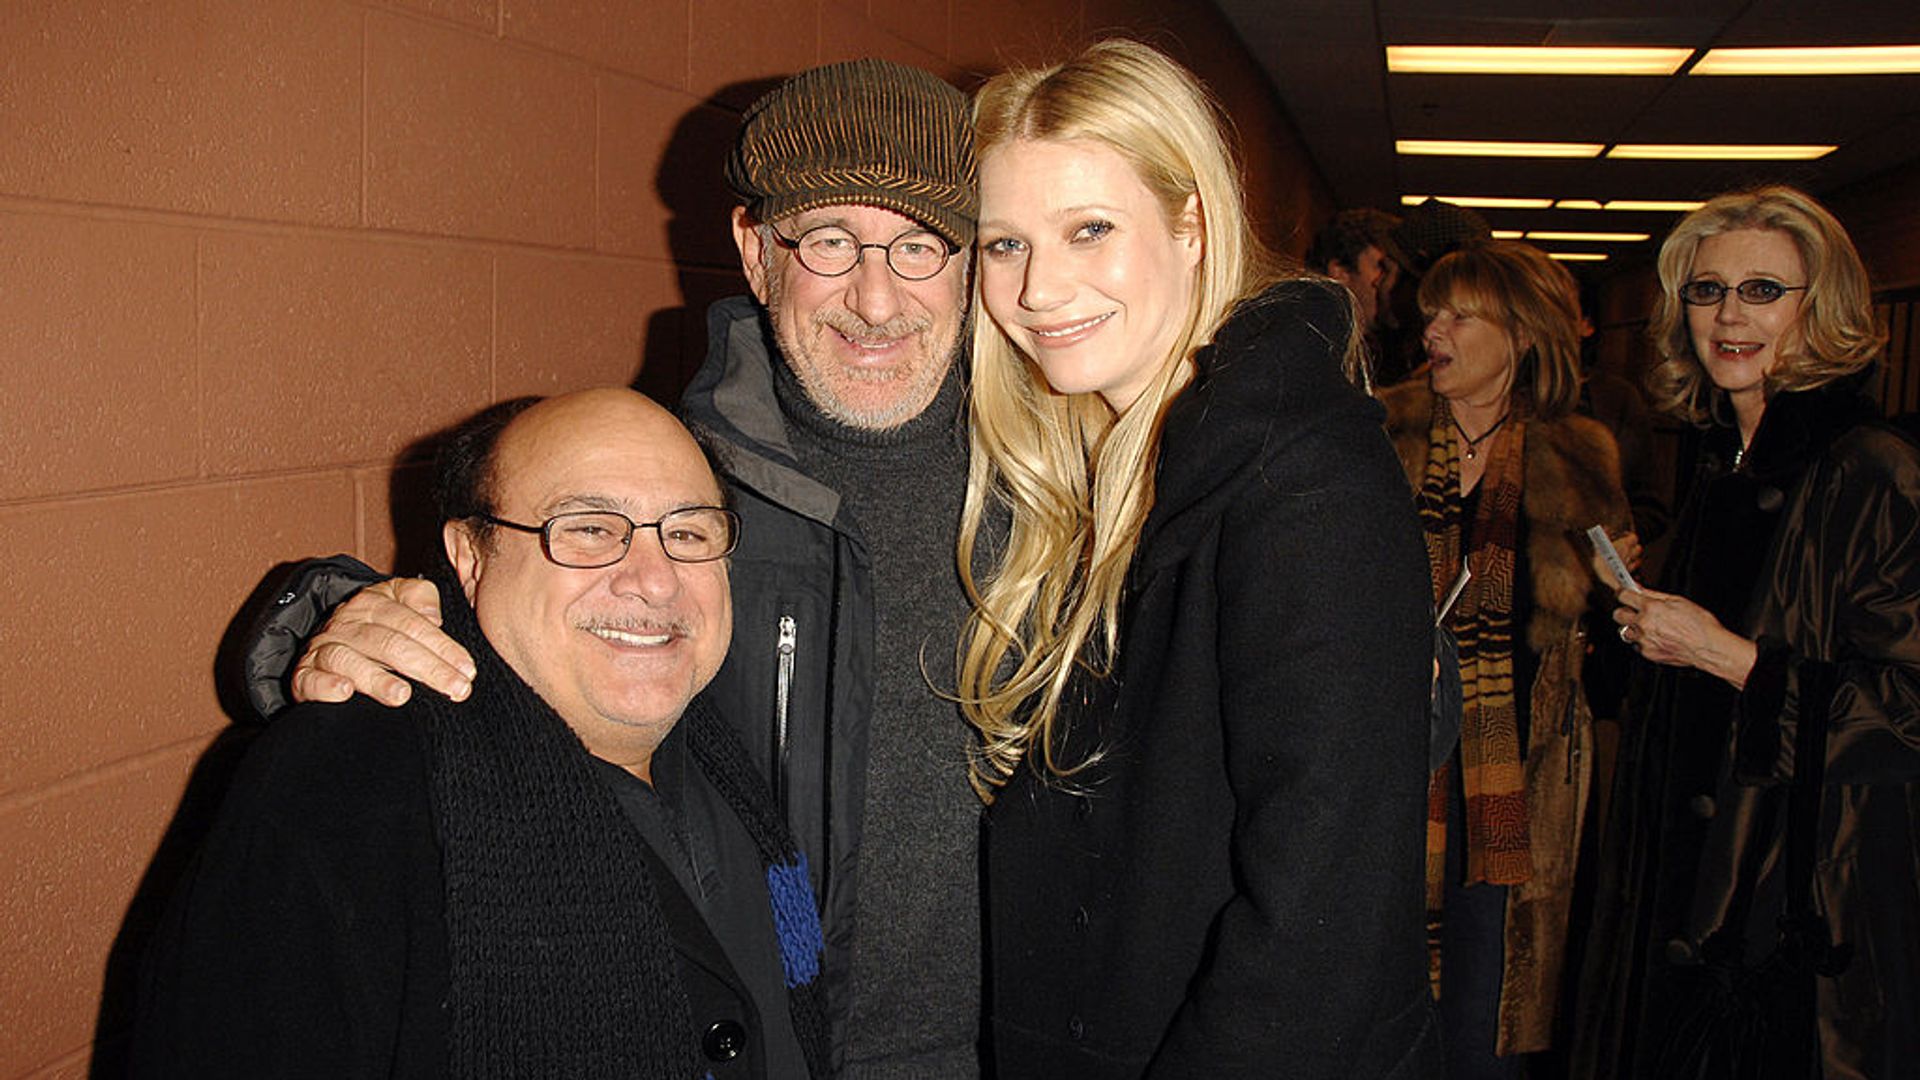 Danny DeVito, Steven Spielberg, Gwyneth Paltrow and Blythe Danner at the Sundance Film Festival in 2007. 